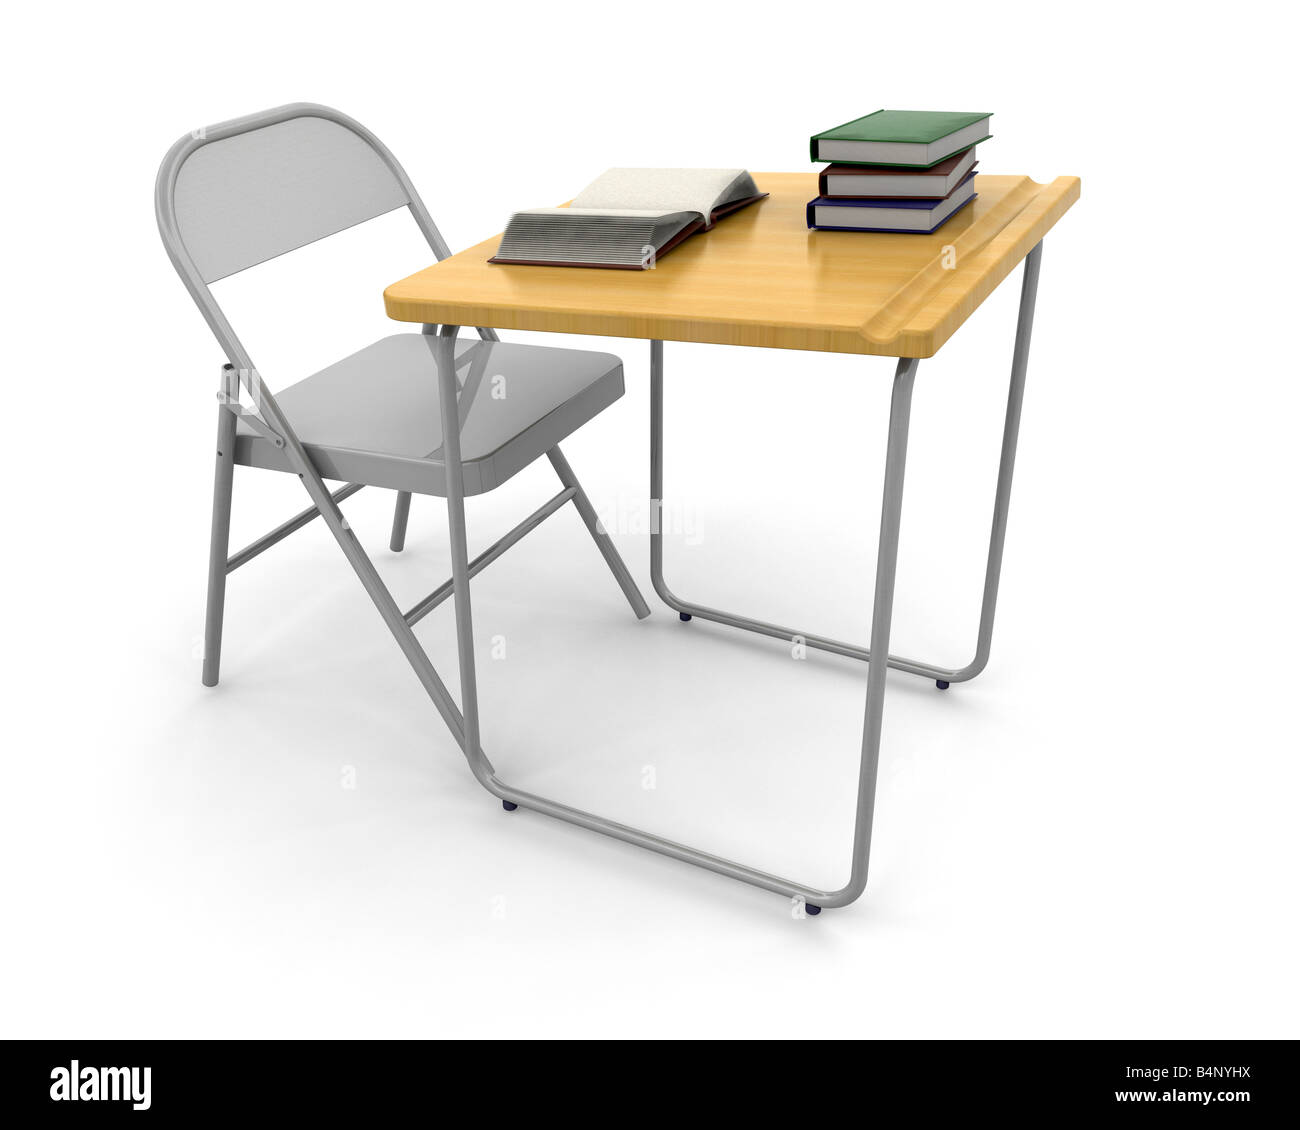 3D render of a desk and chair with a stack of books Stock Photo